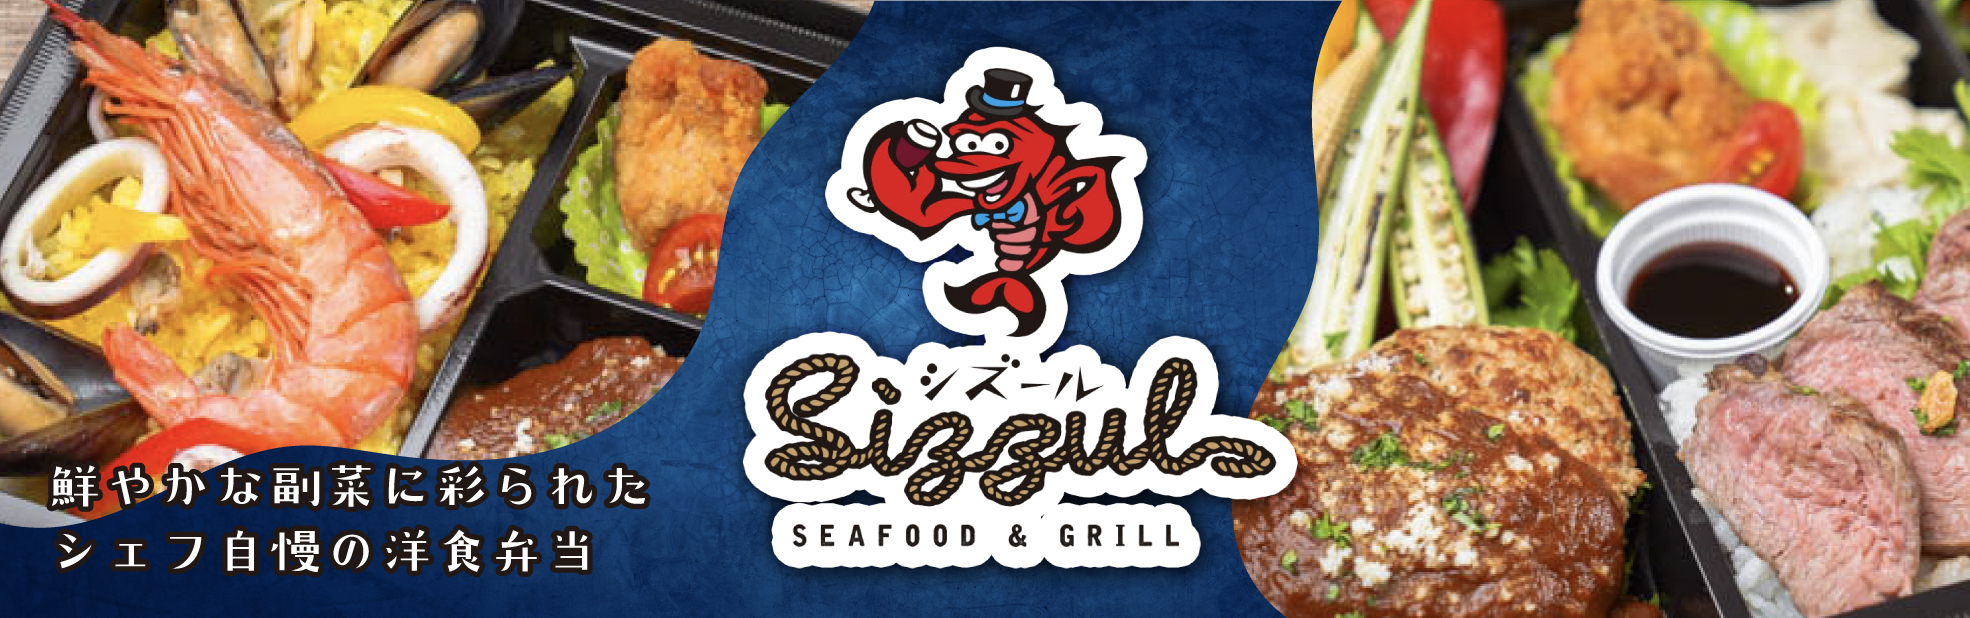 SIZZUL ～SEAFOOD＆GRILL～（埼玉店）